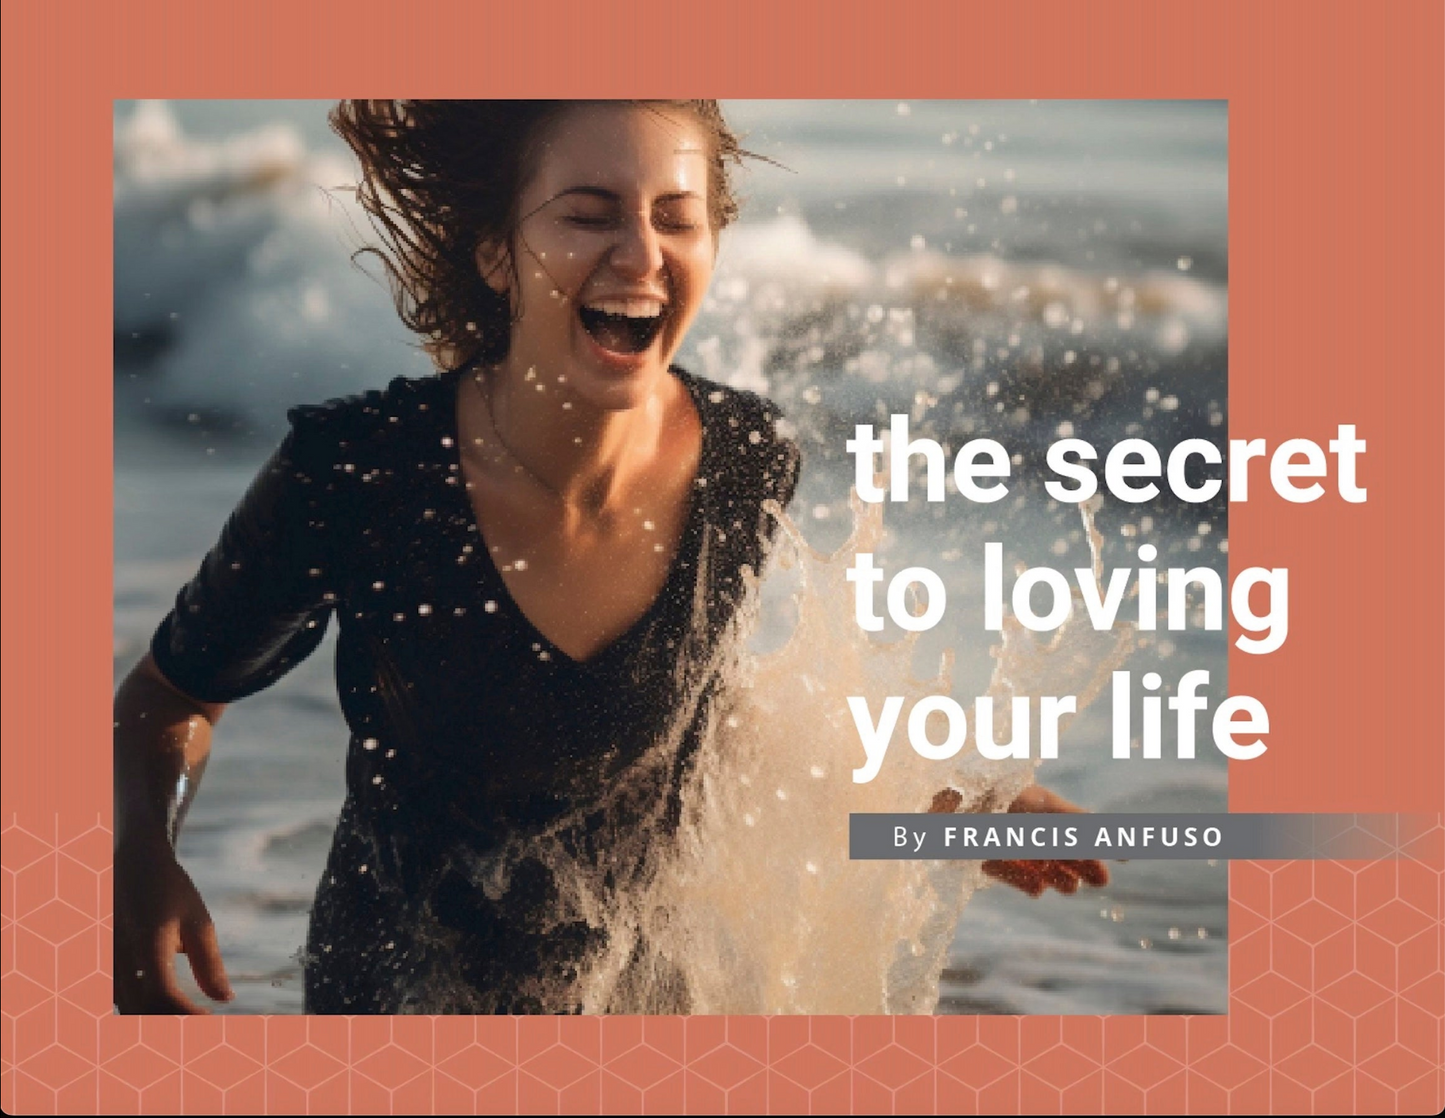 "The Secret to Loving Your Life" Biographical Book, Workbook and Photobook Package